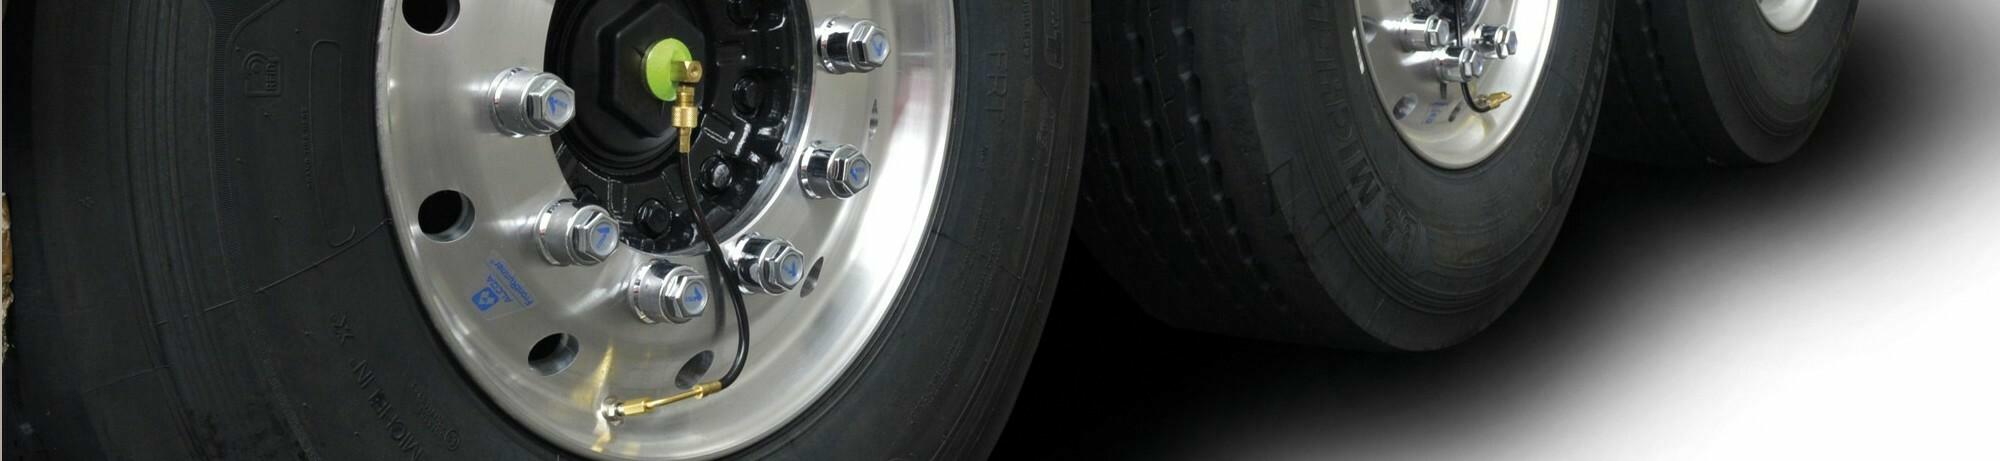 TIPS&TRICKS - Automatic tyre pressure